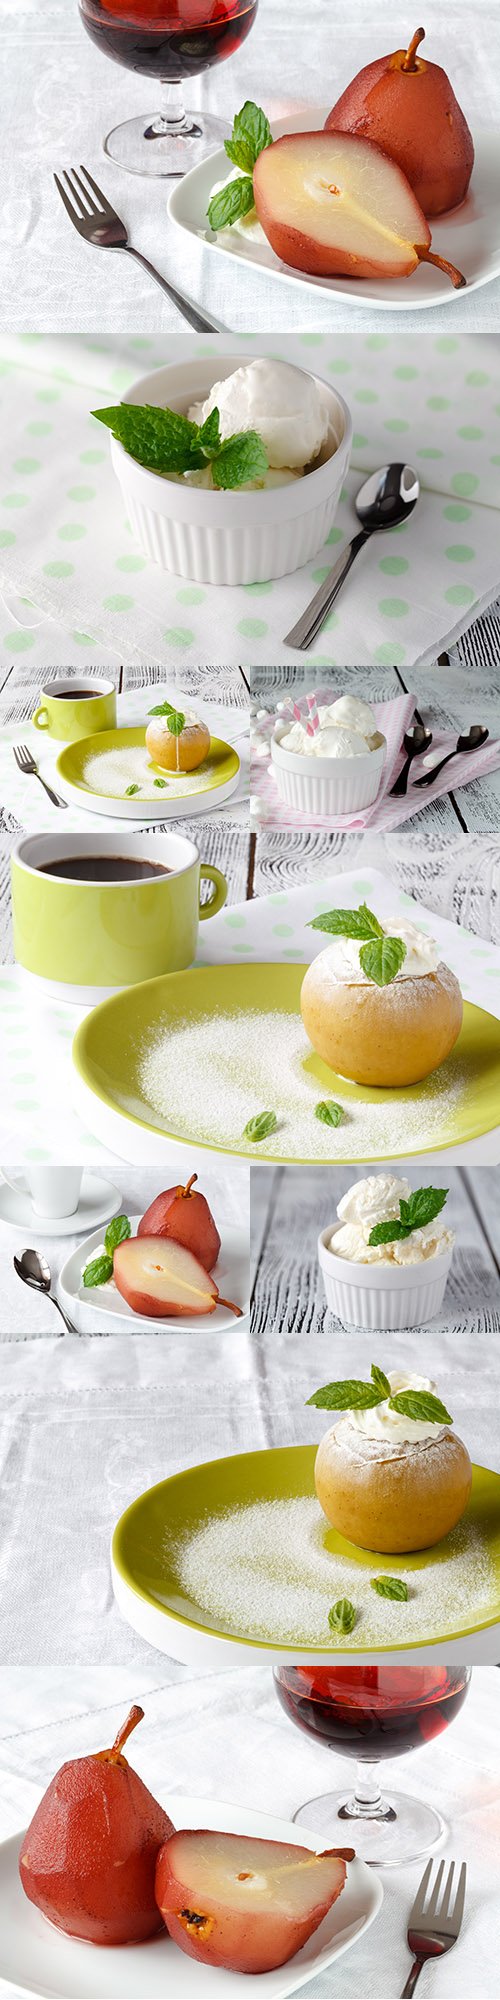 Fruit dessert with ice cream and mint leaves